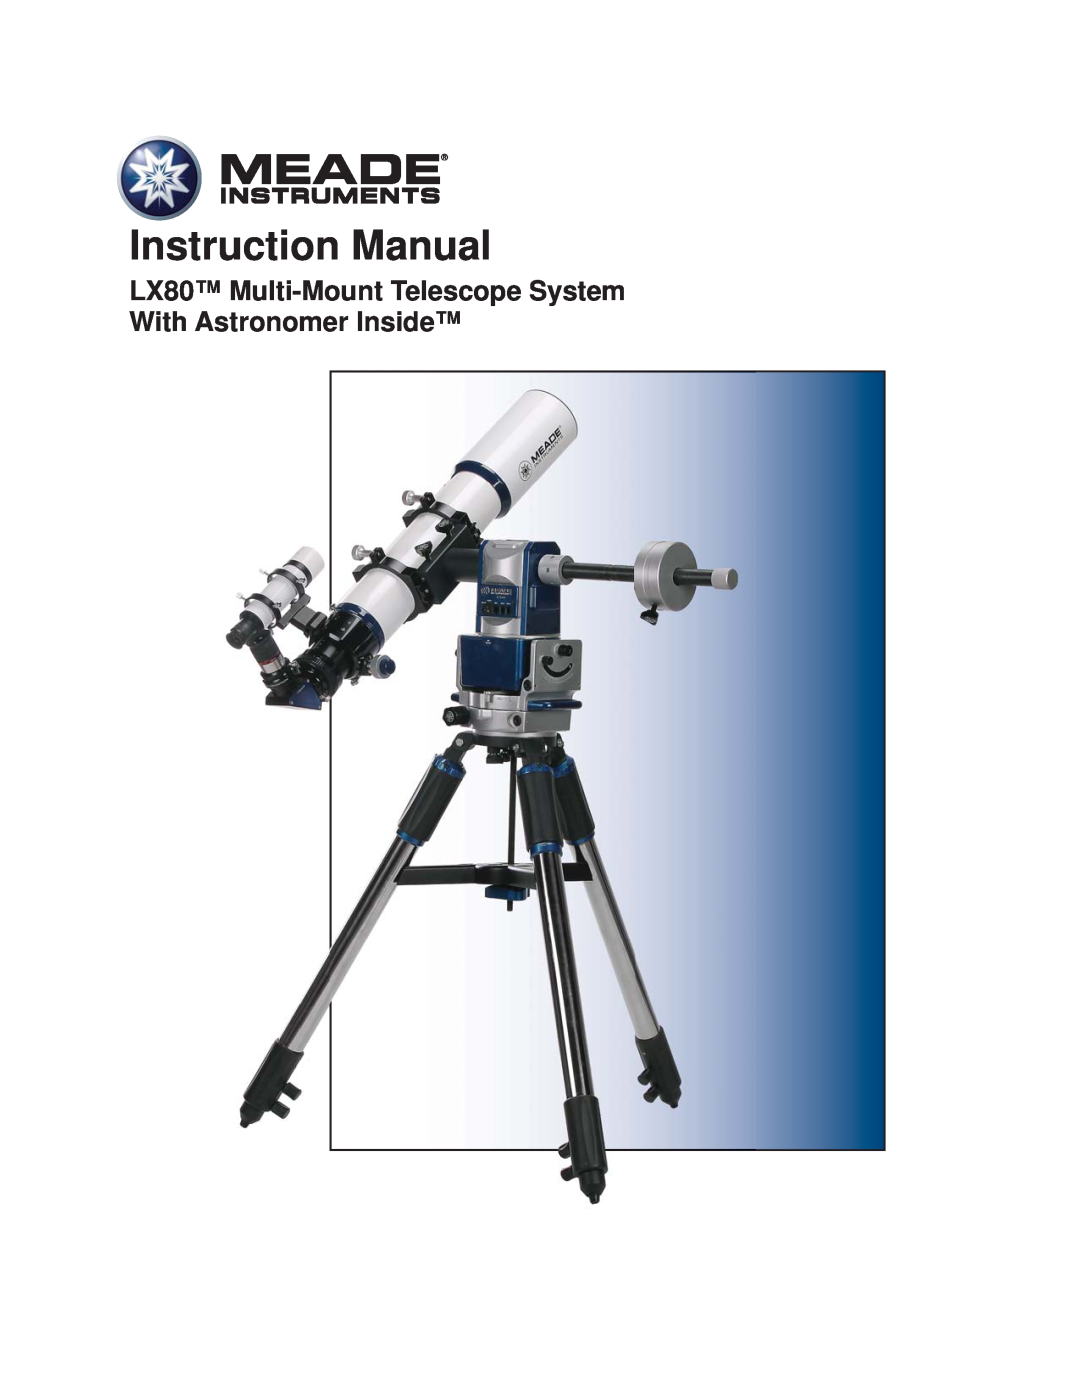 Meade instruction manual LX80 Multi-Mount Telescope System With Astronomer Inside 